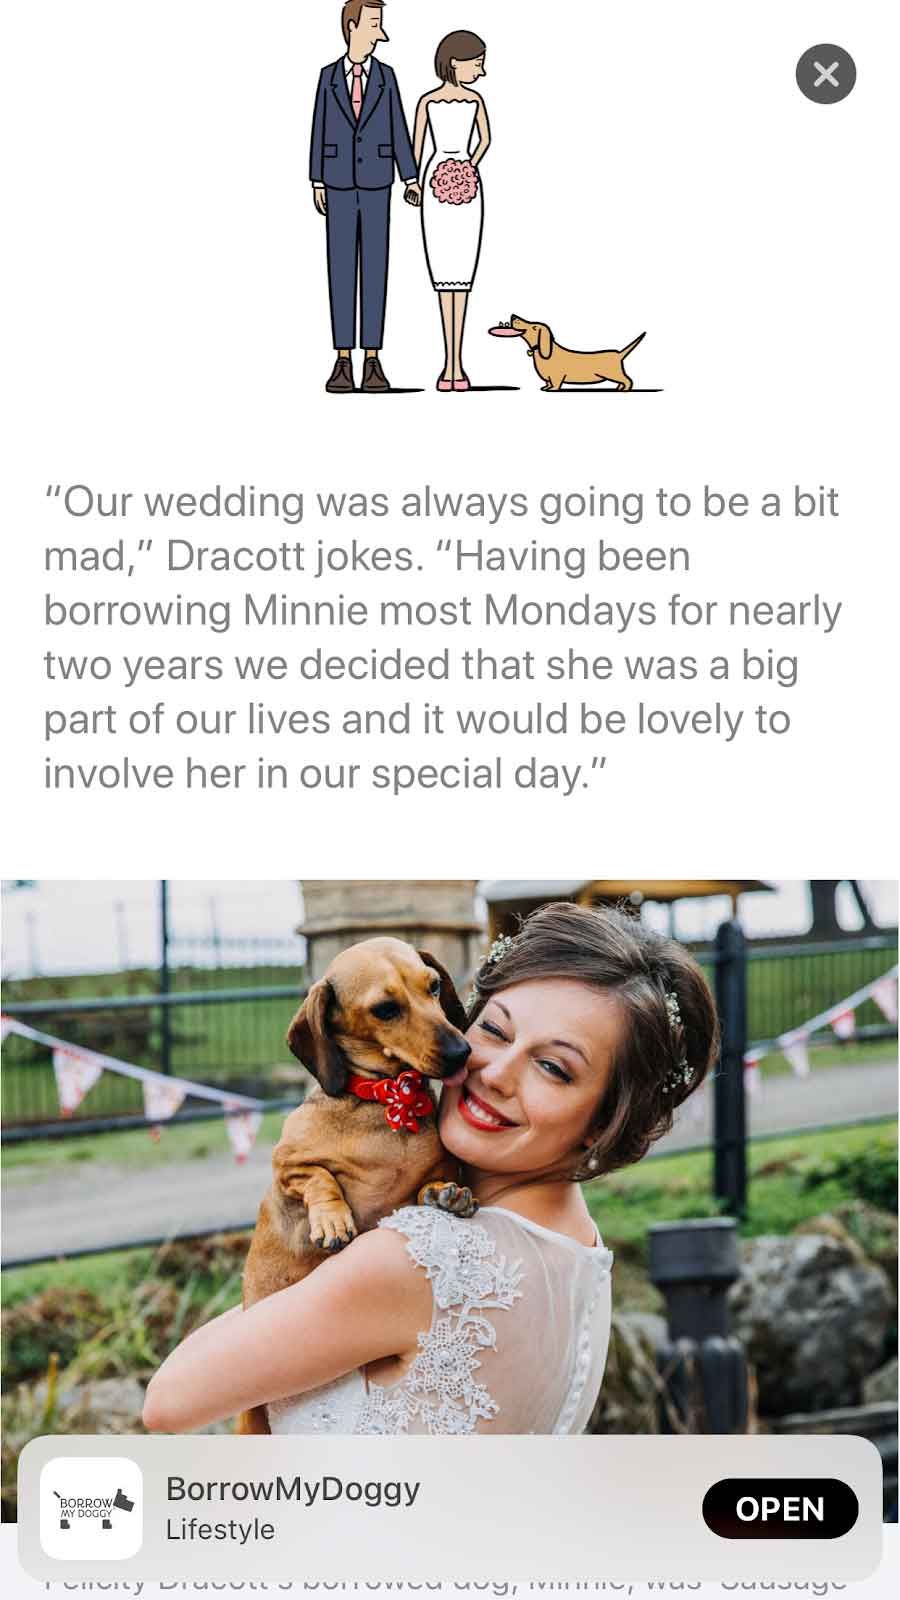 "Our wedding was always going to be a bit mad," Dracott jokes. "Having been borrowing Minnie most Mondays for nearly two years we decided that she was a big part of our lives and it would be lovely to involve her in our special day."